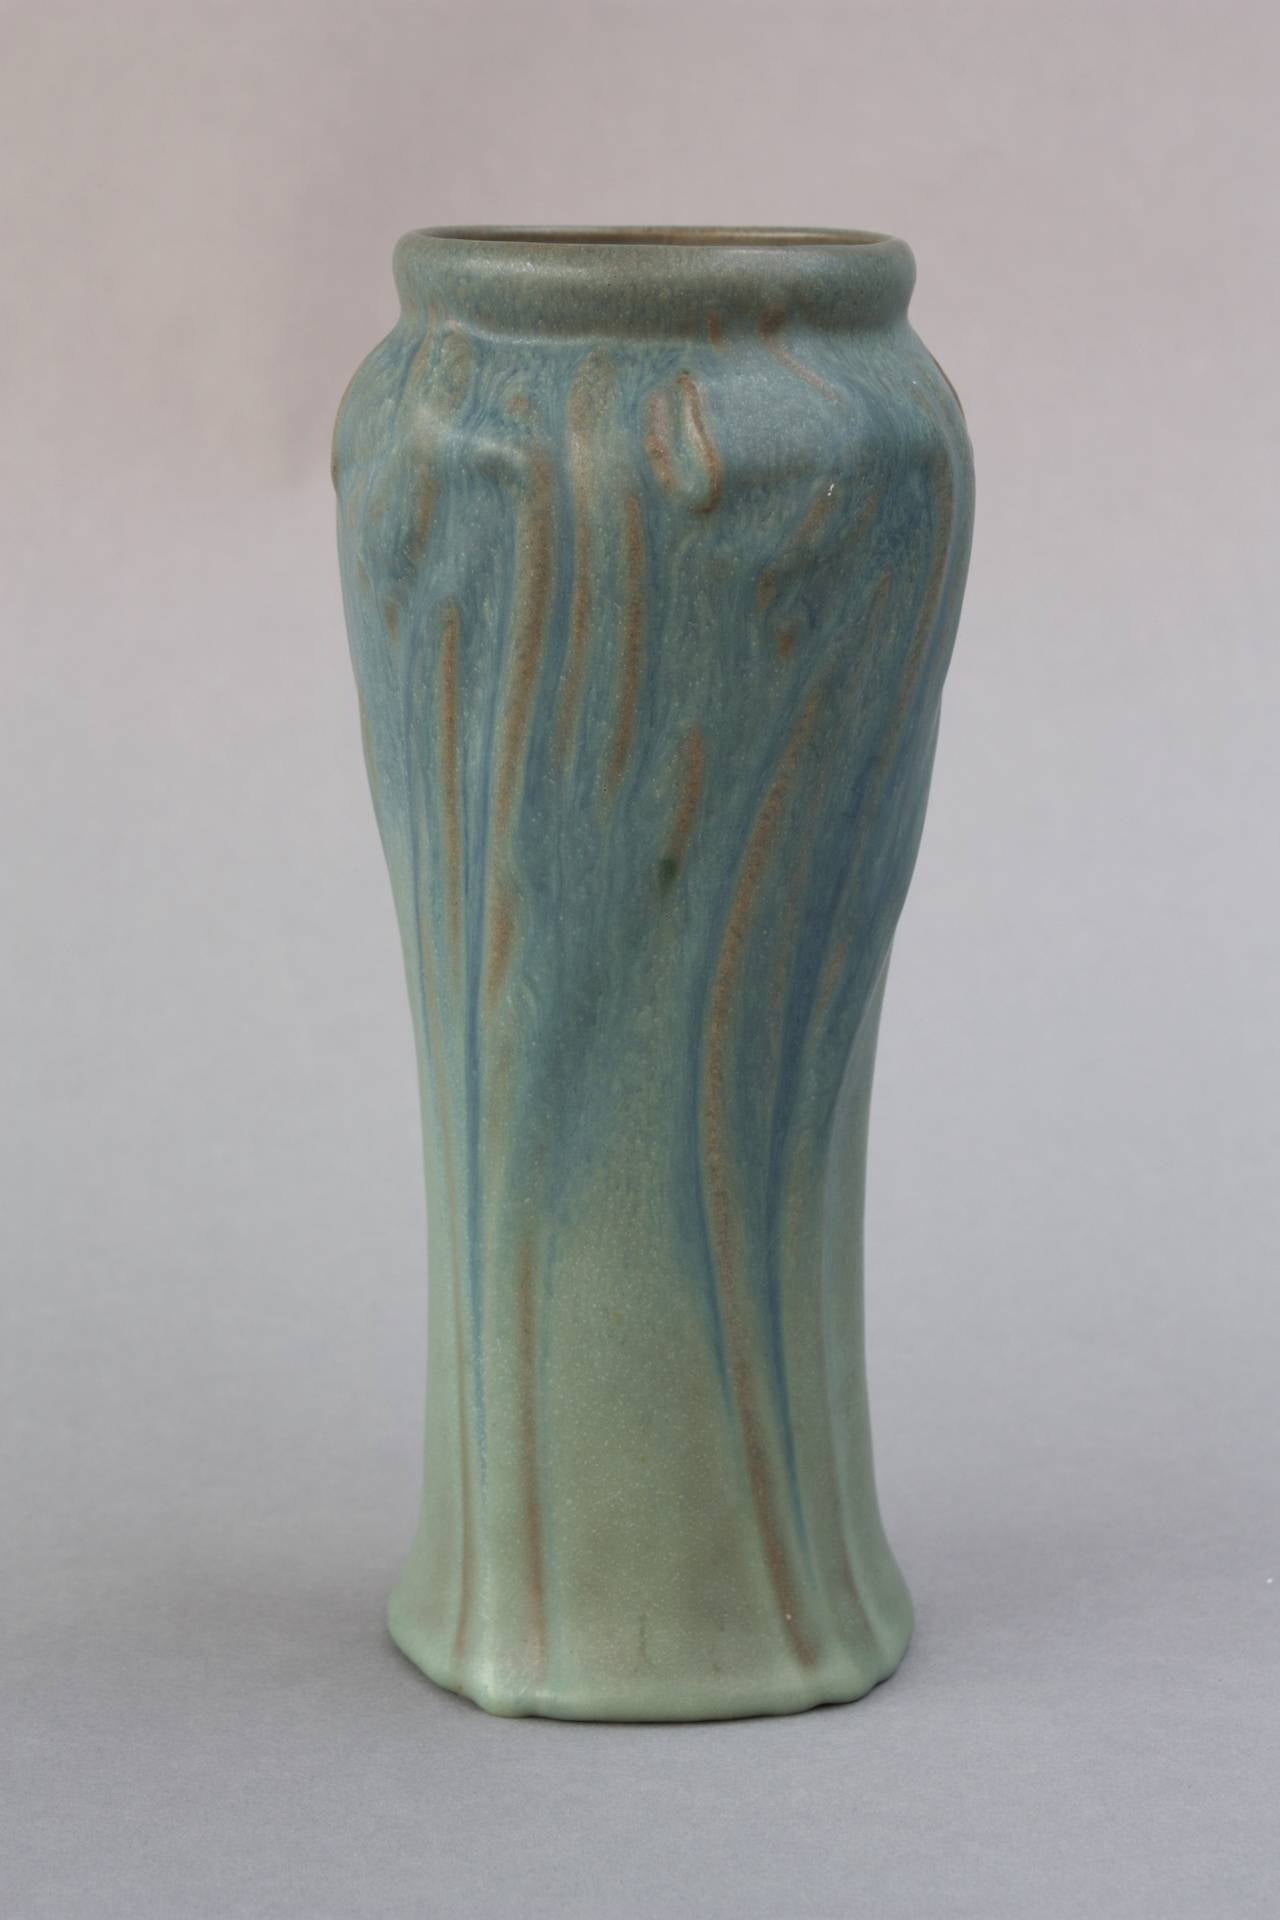 Beautiful dated Van Briggle vase with dark, rich glaze.  It is dated on the bottom, 1919.  It is in fine condition with no chips, cracks, or repairs.